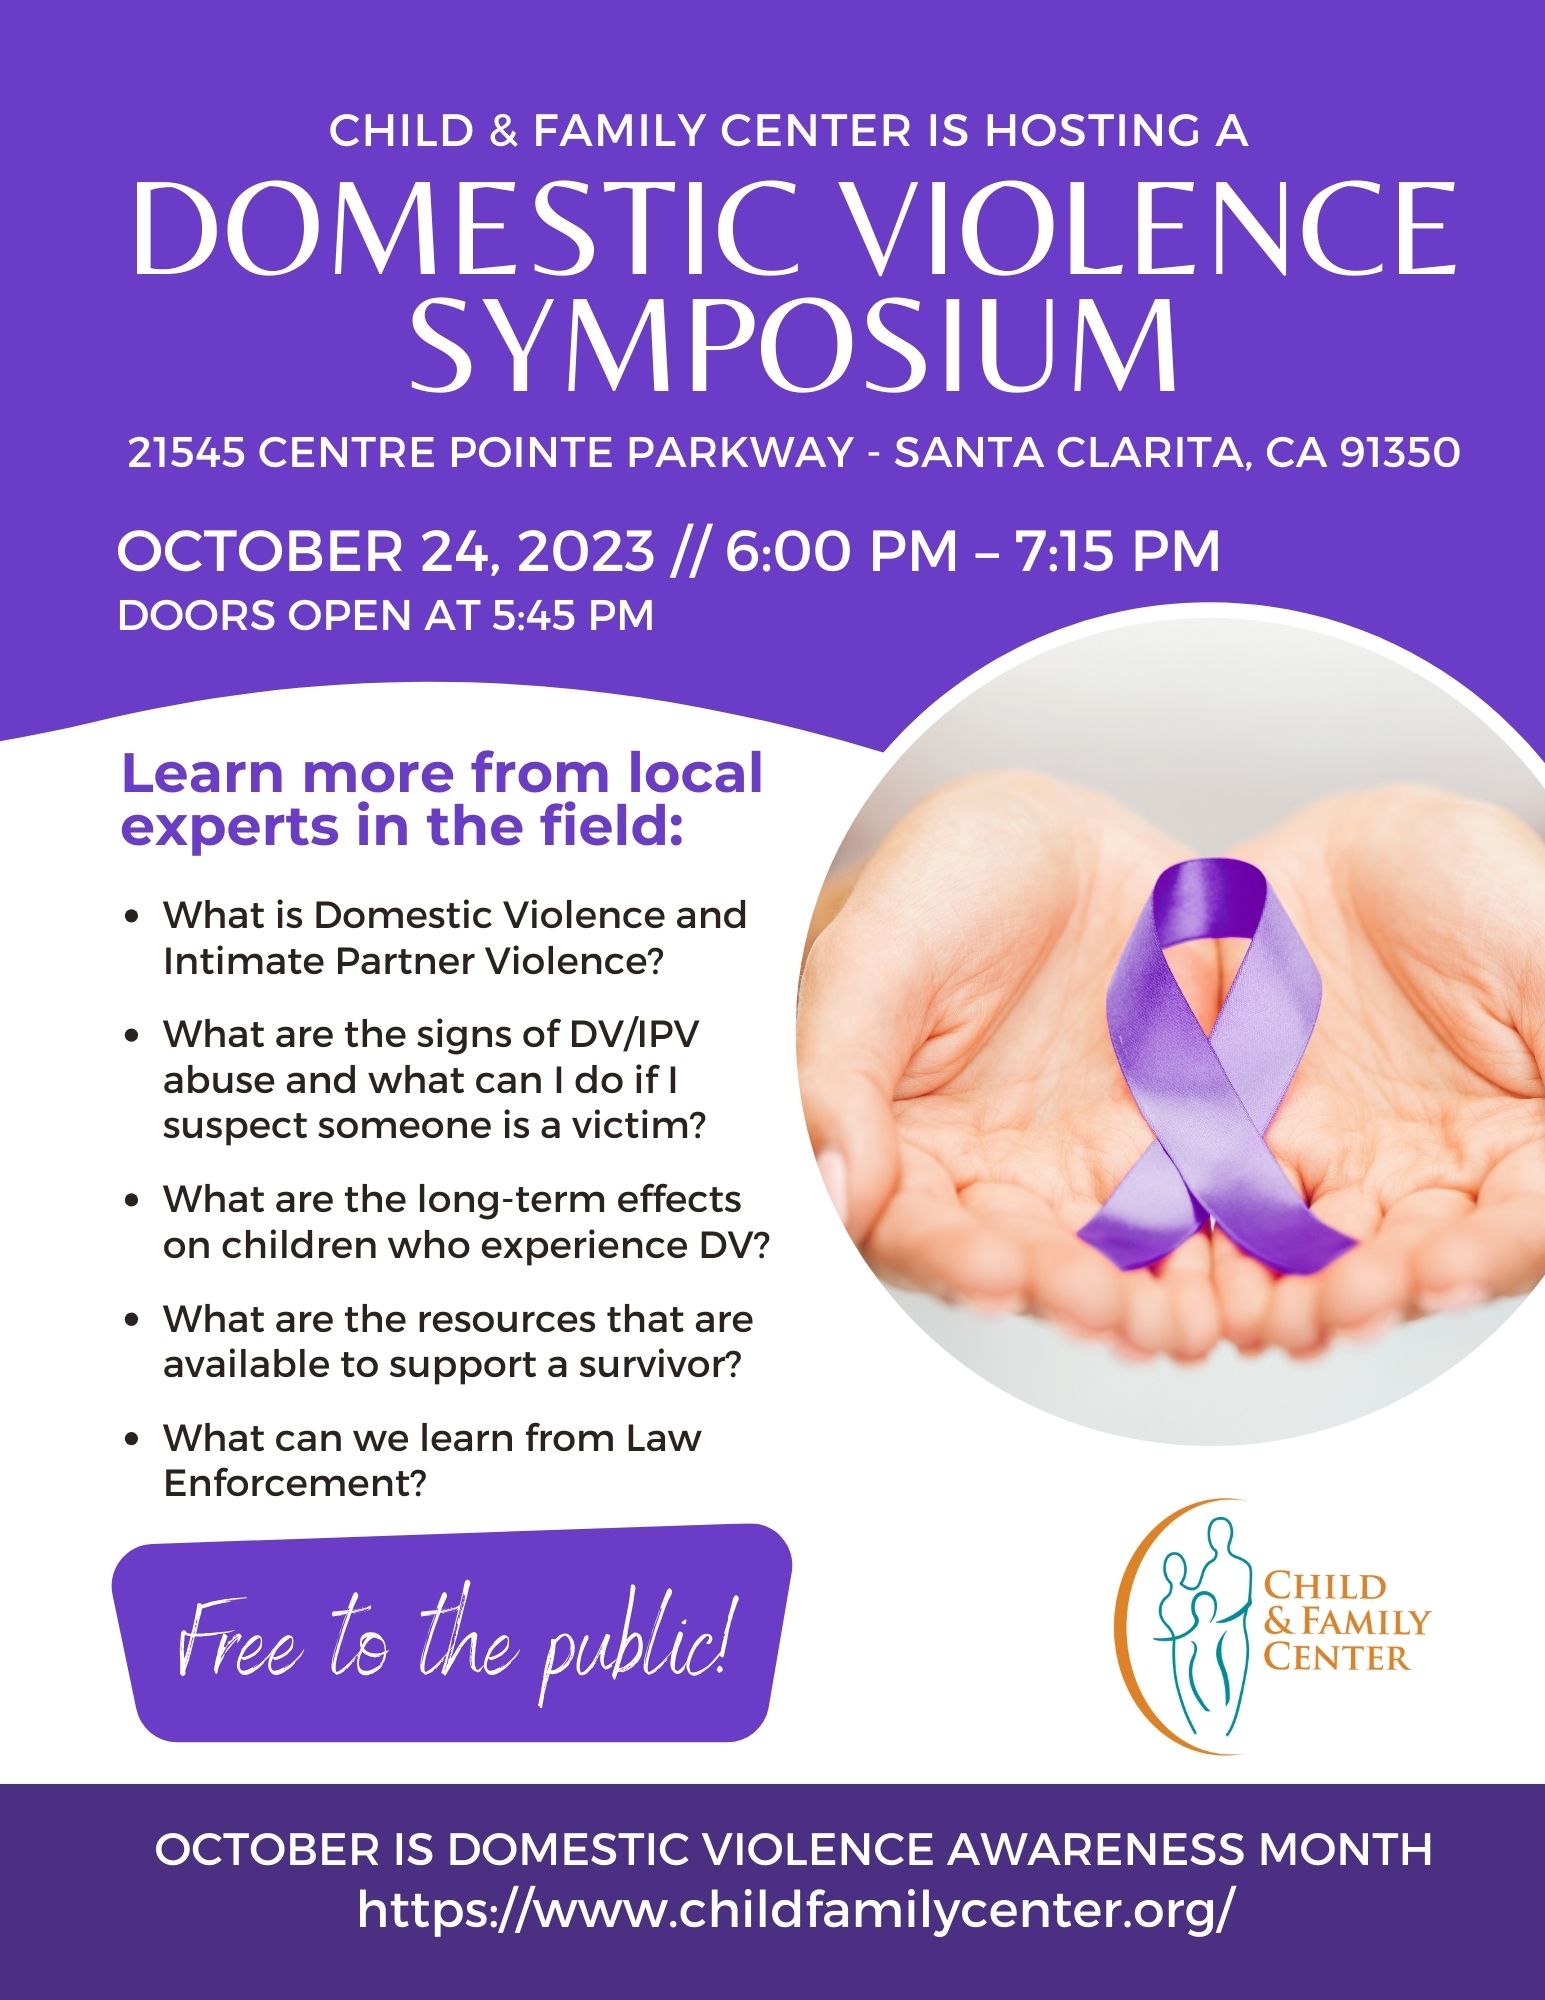 Child & Family Center is hosting a Domestic Violence Symposium